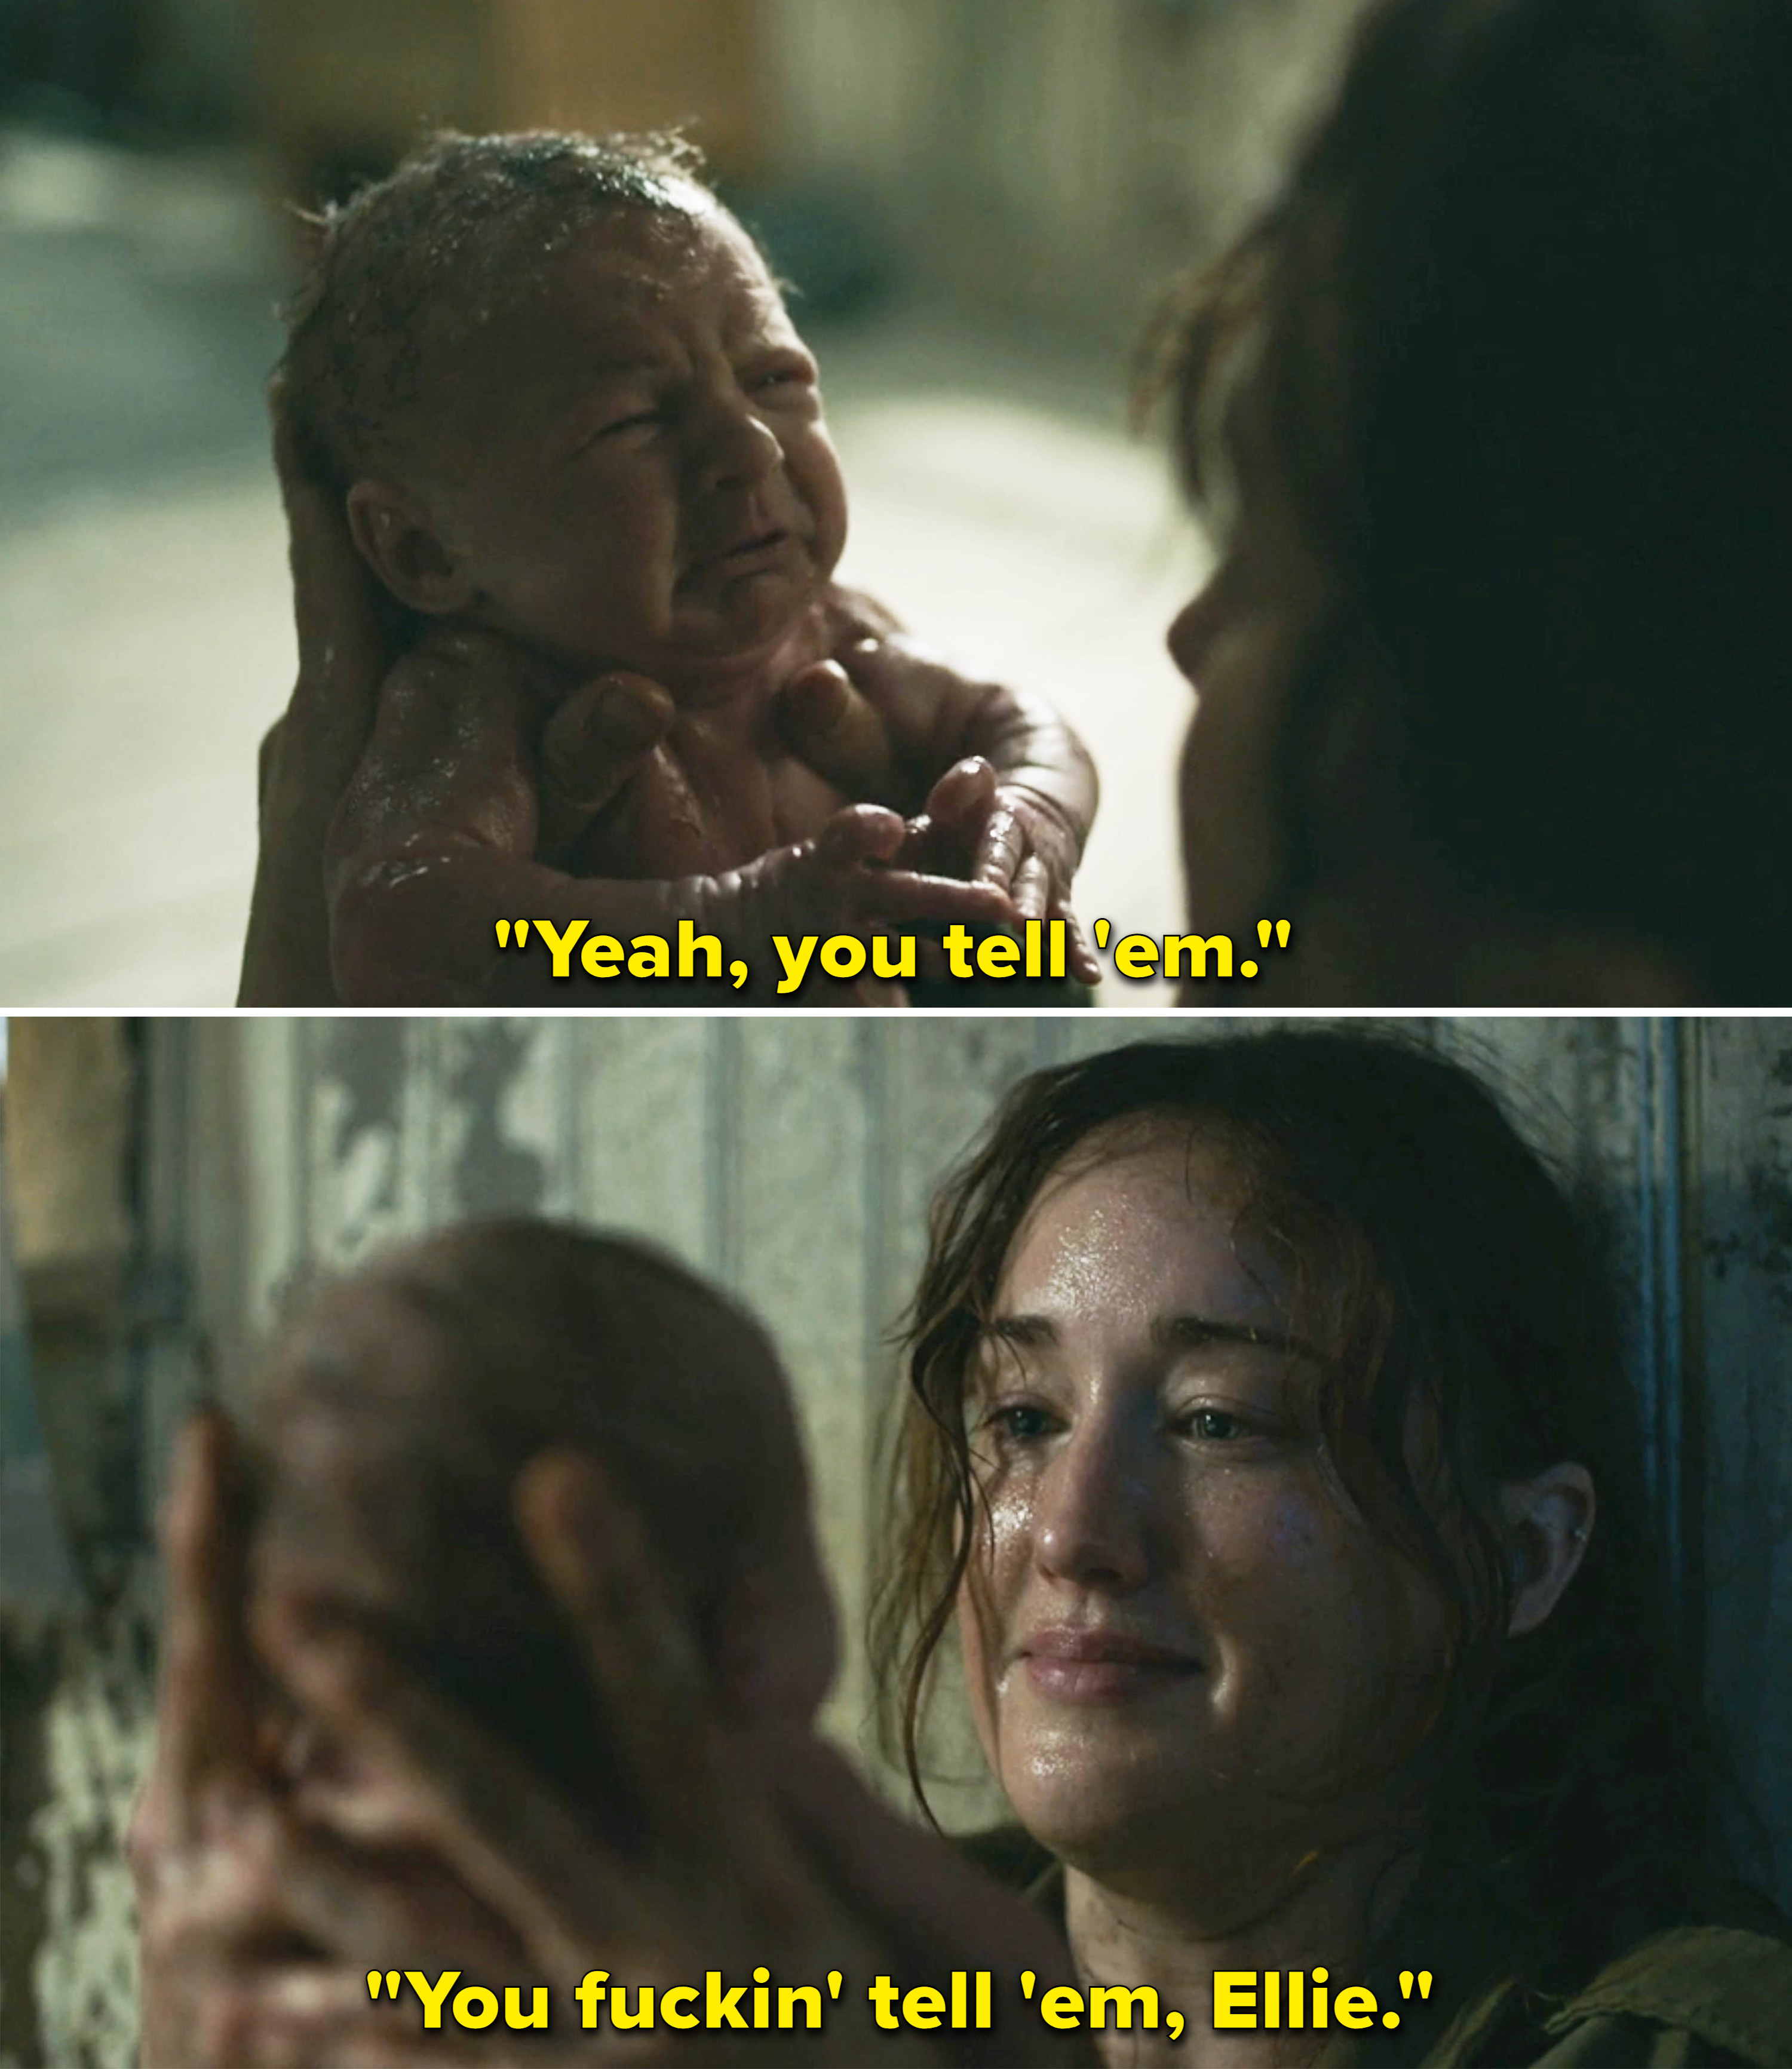 Anna says to her crying baby &quot;Yeah, you tell &#x27;em. You fuckin&#x27; tell &#x27;em, Ellie&quot;